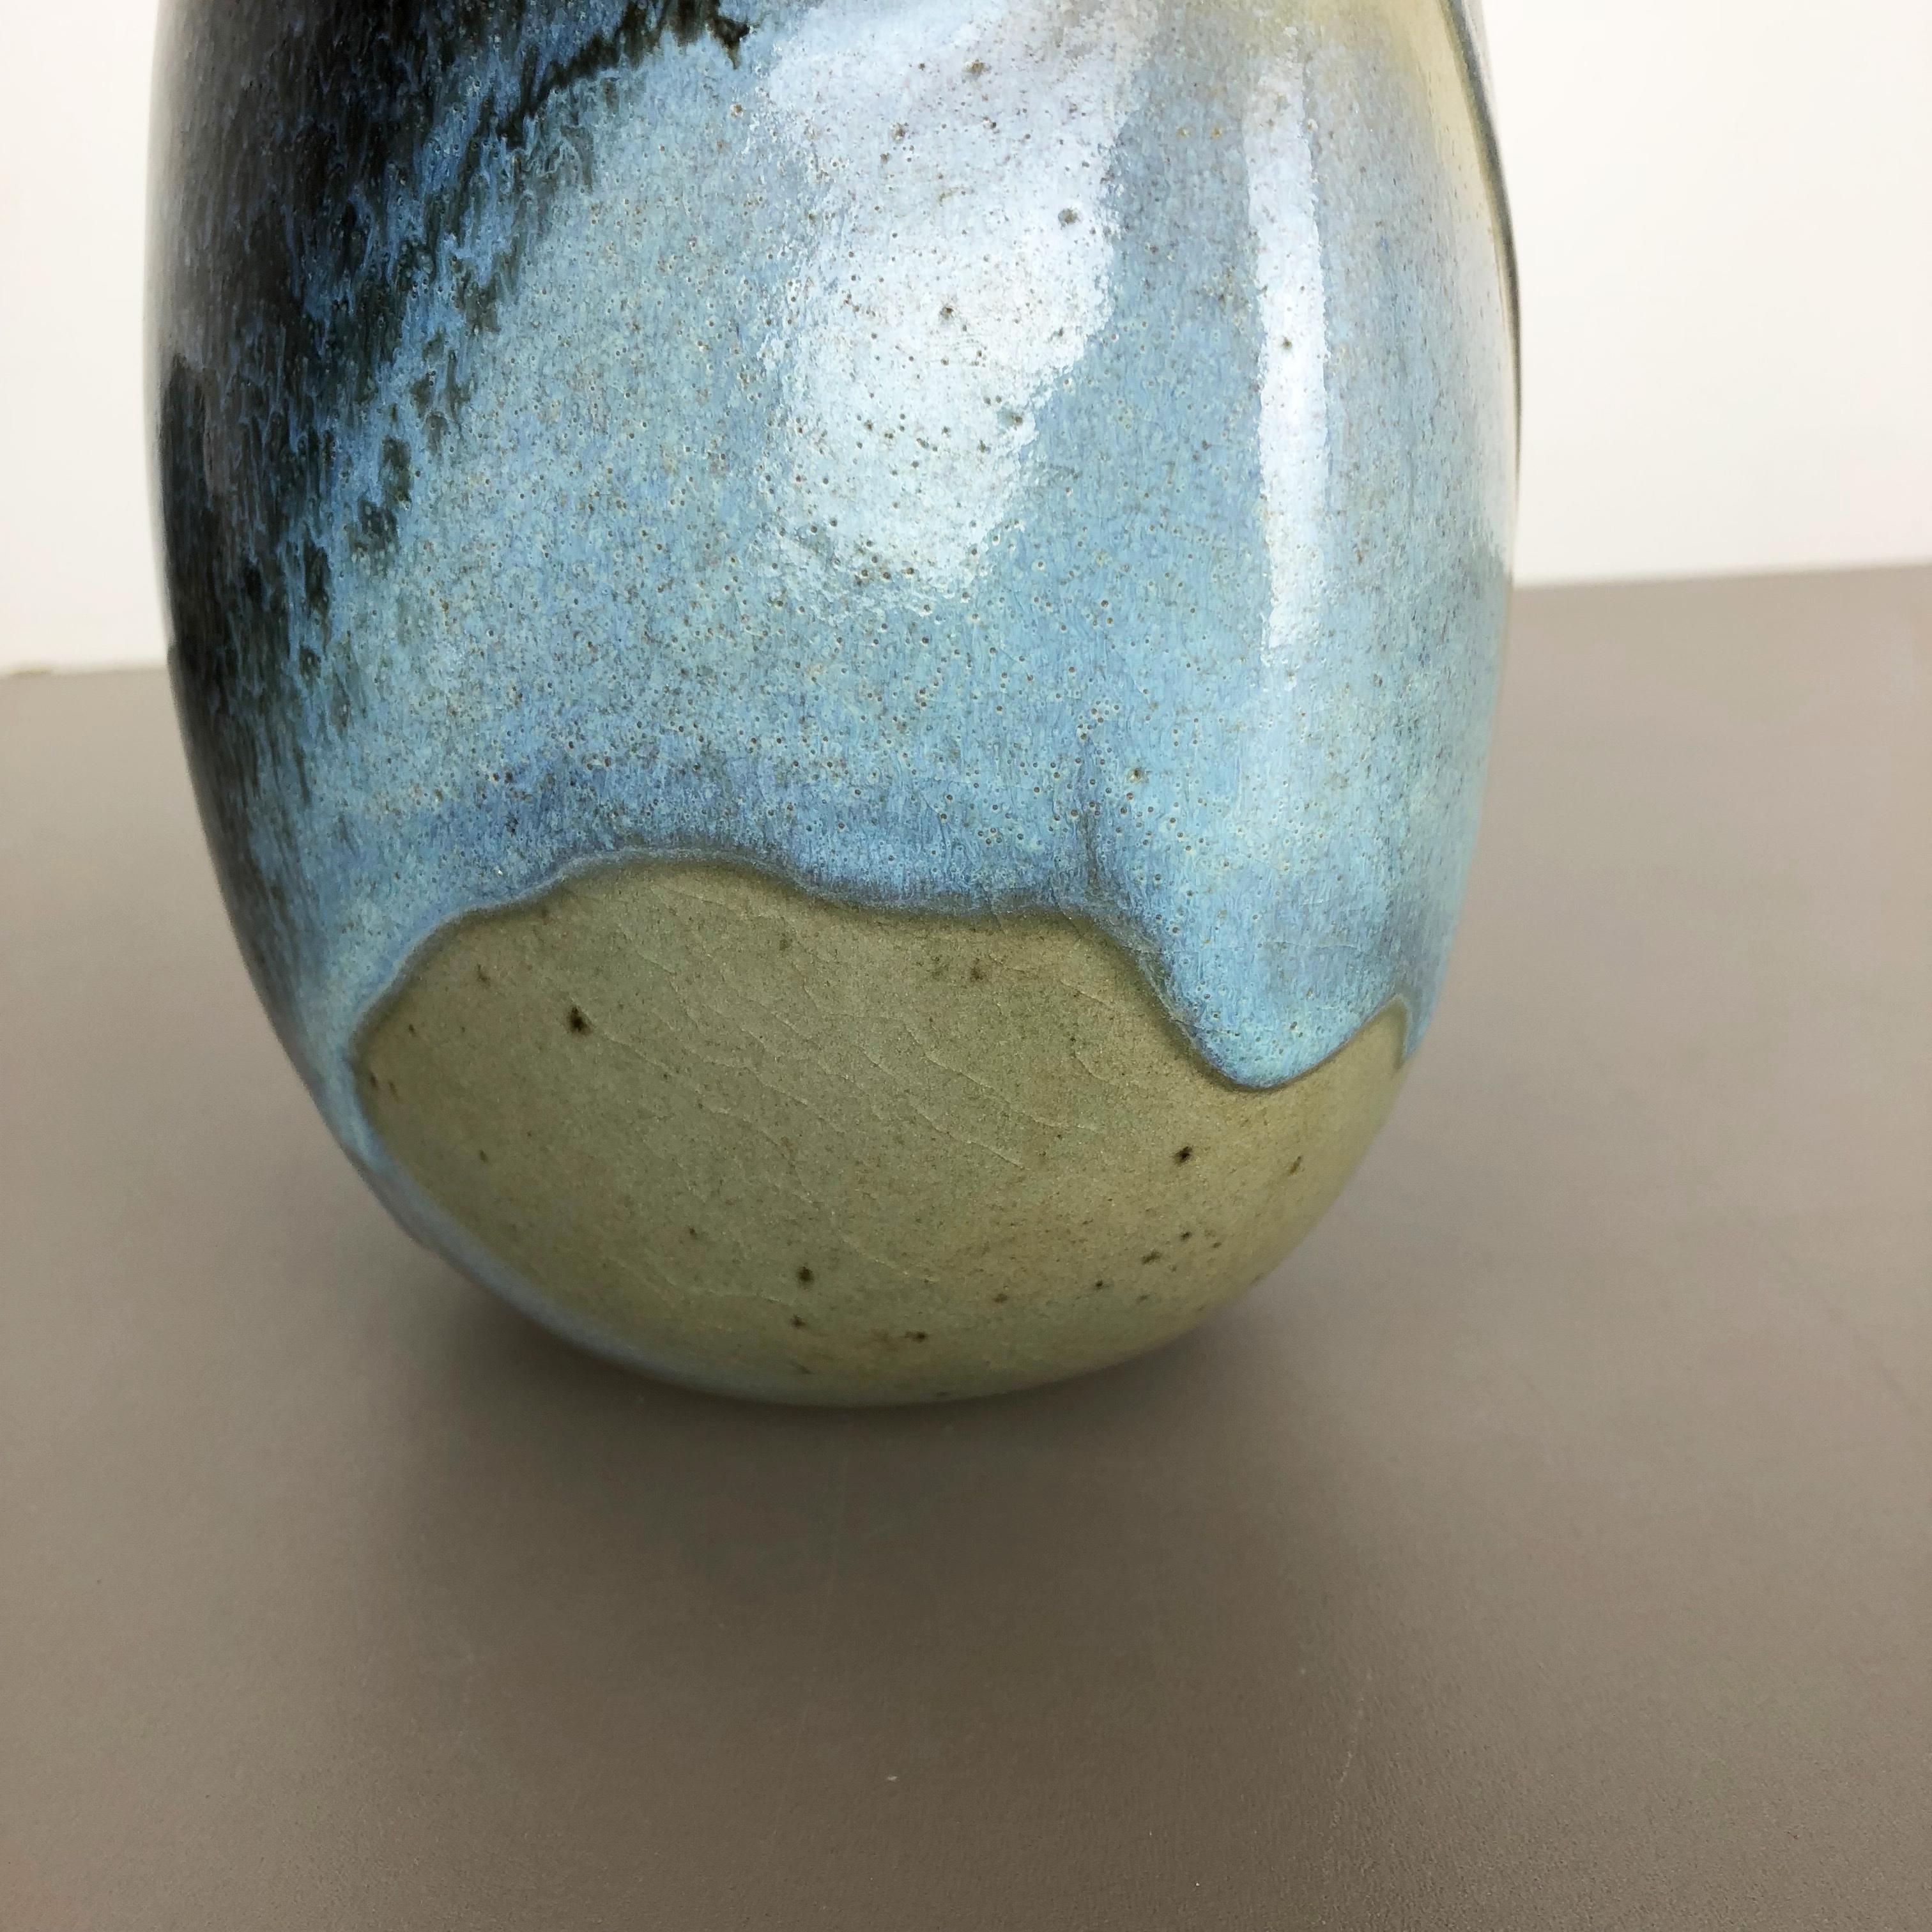 Abstract Ceramic Studio Stoneware Vase by Gotlind Weigel, Germany, 1960s For Sale 11